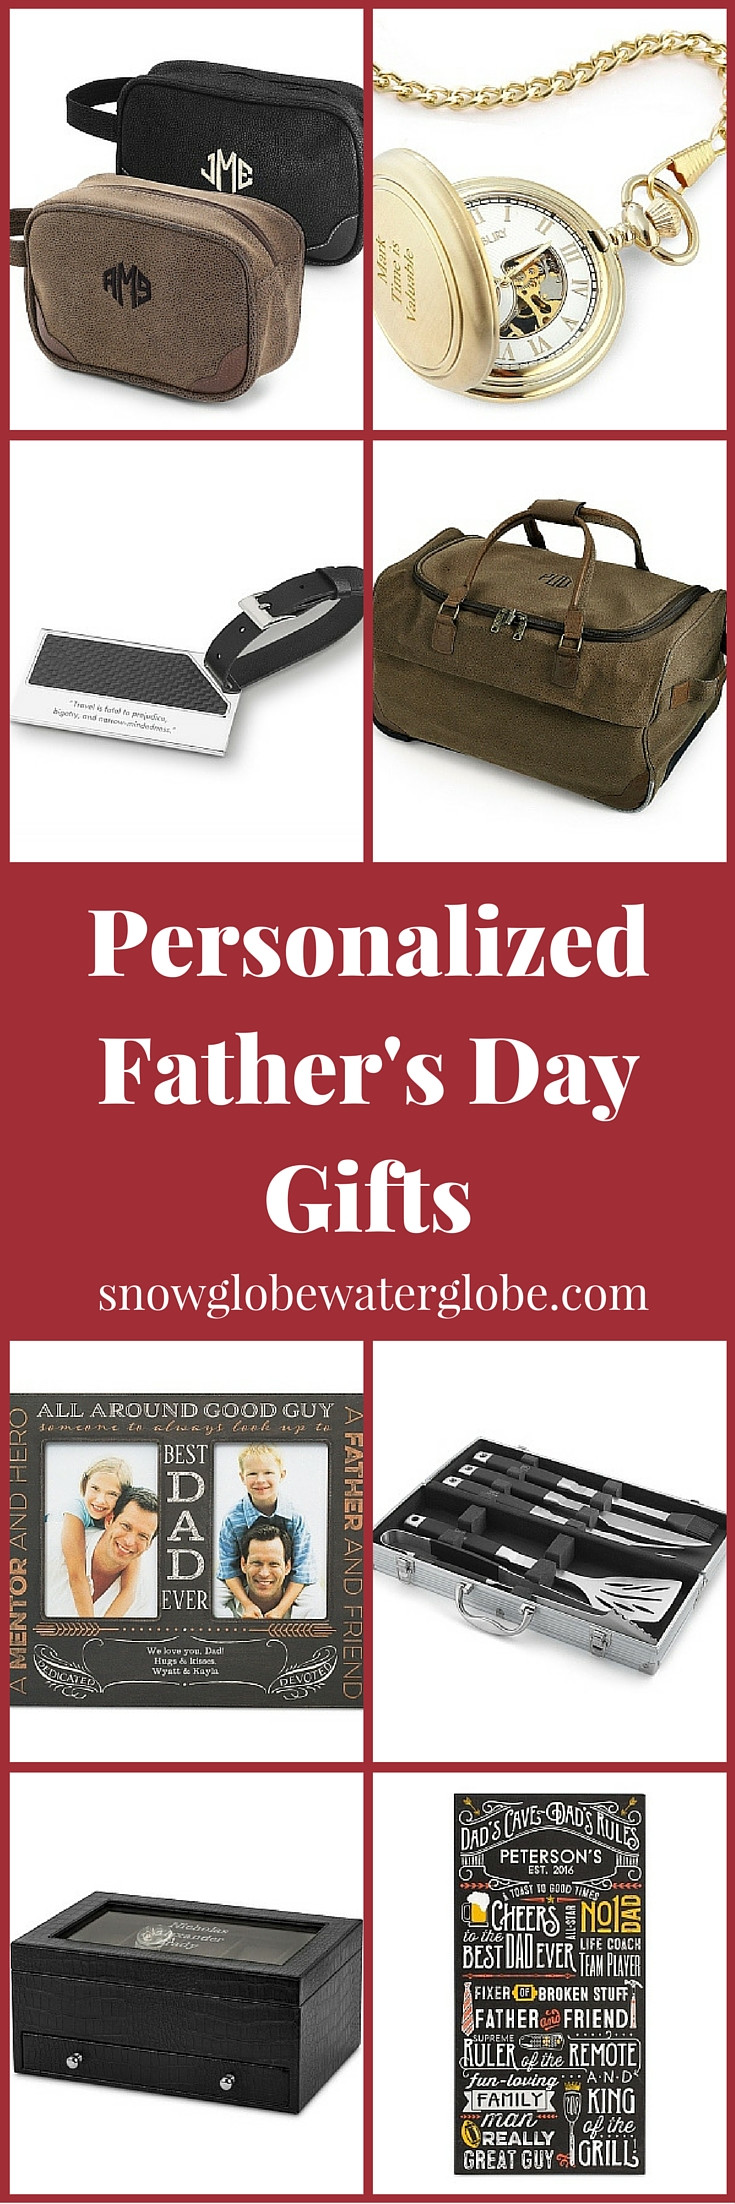 Personalized Fathers Day Gift
 Personalized Father s Day Gifts